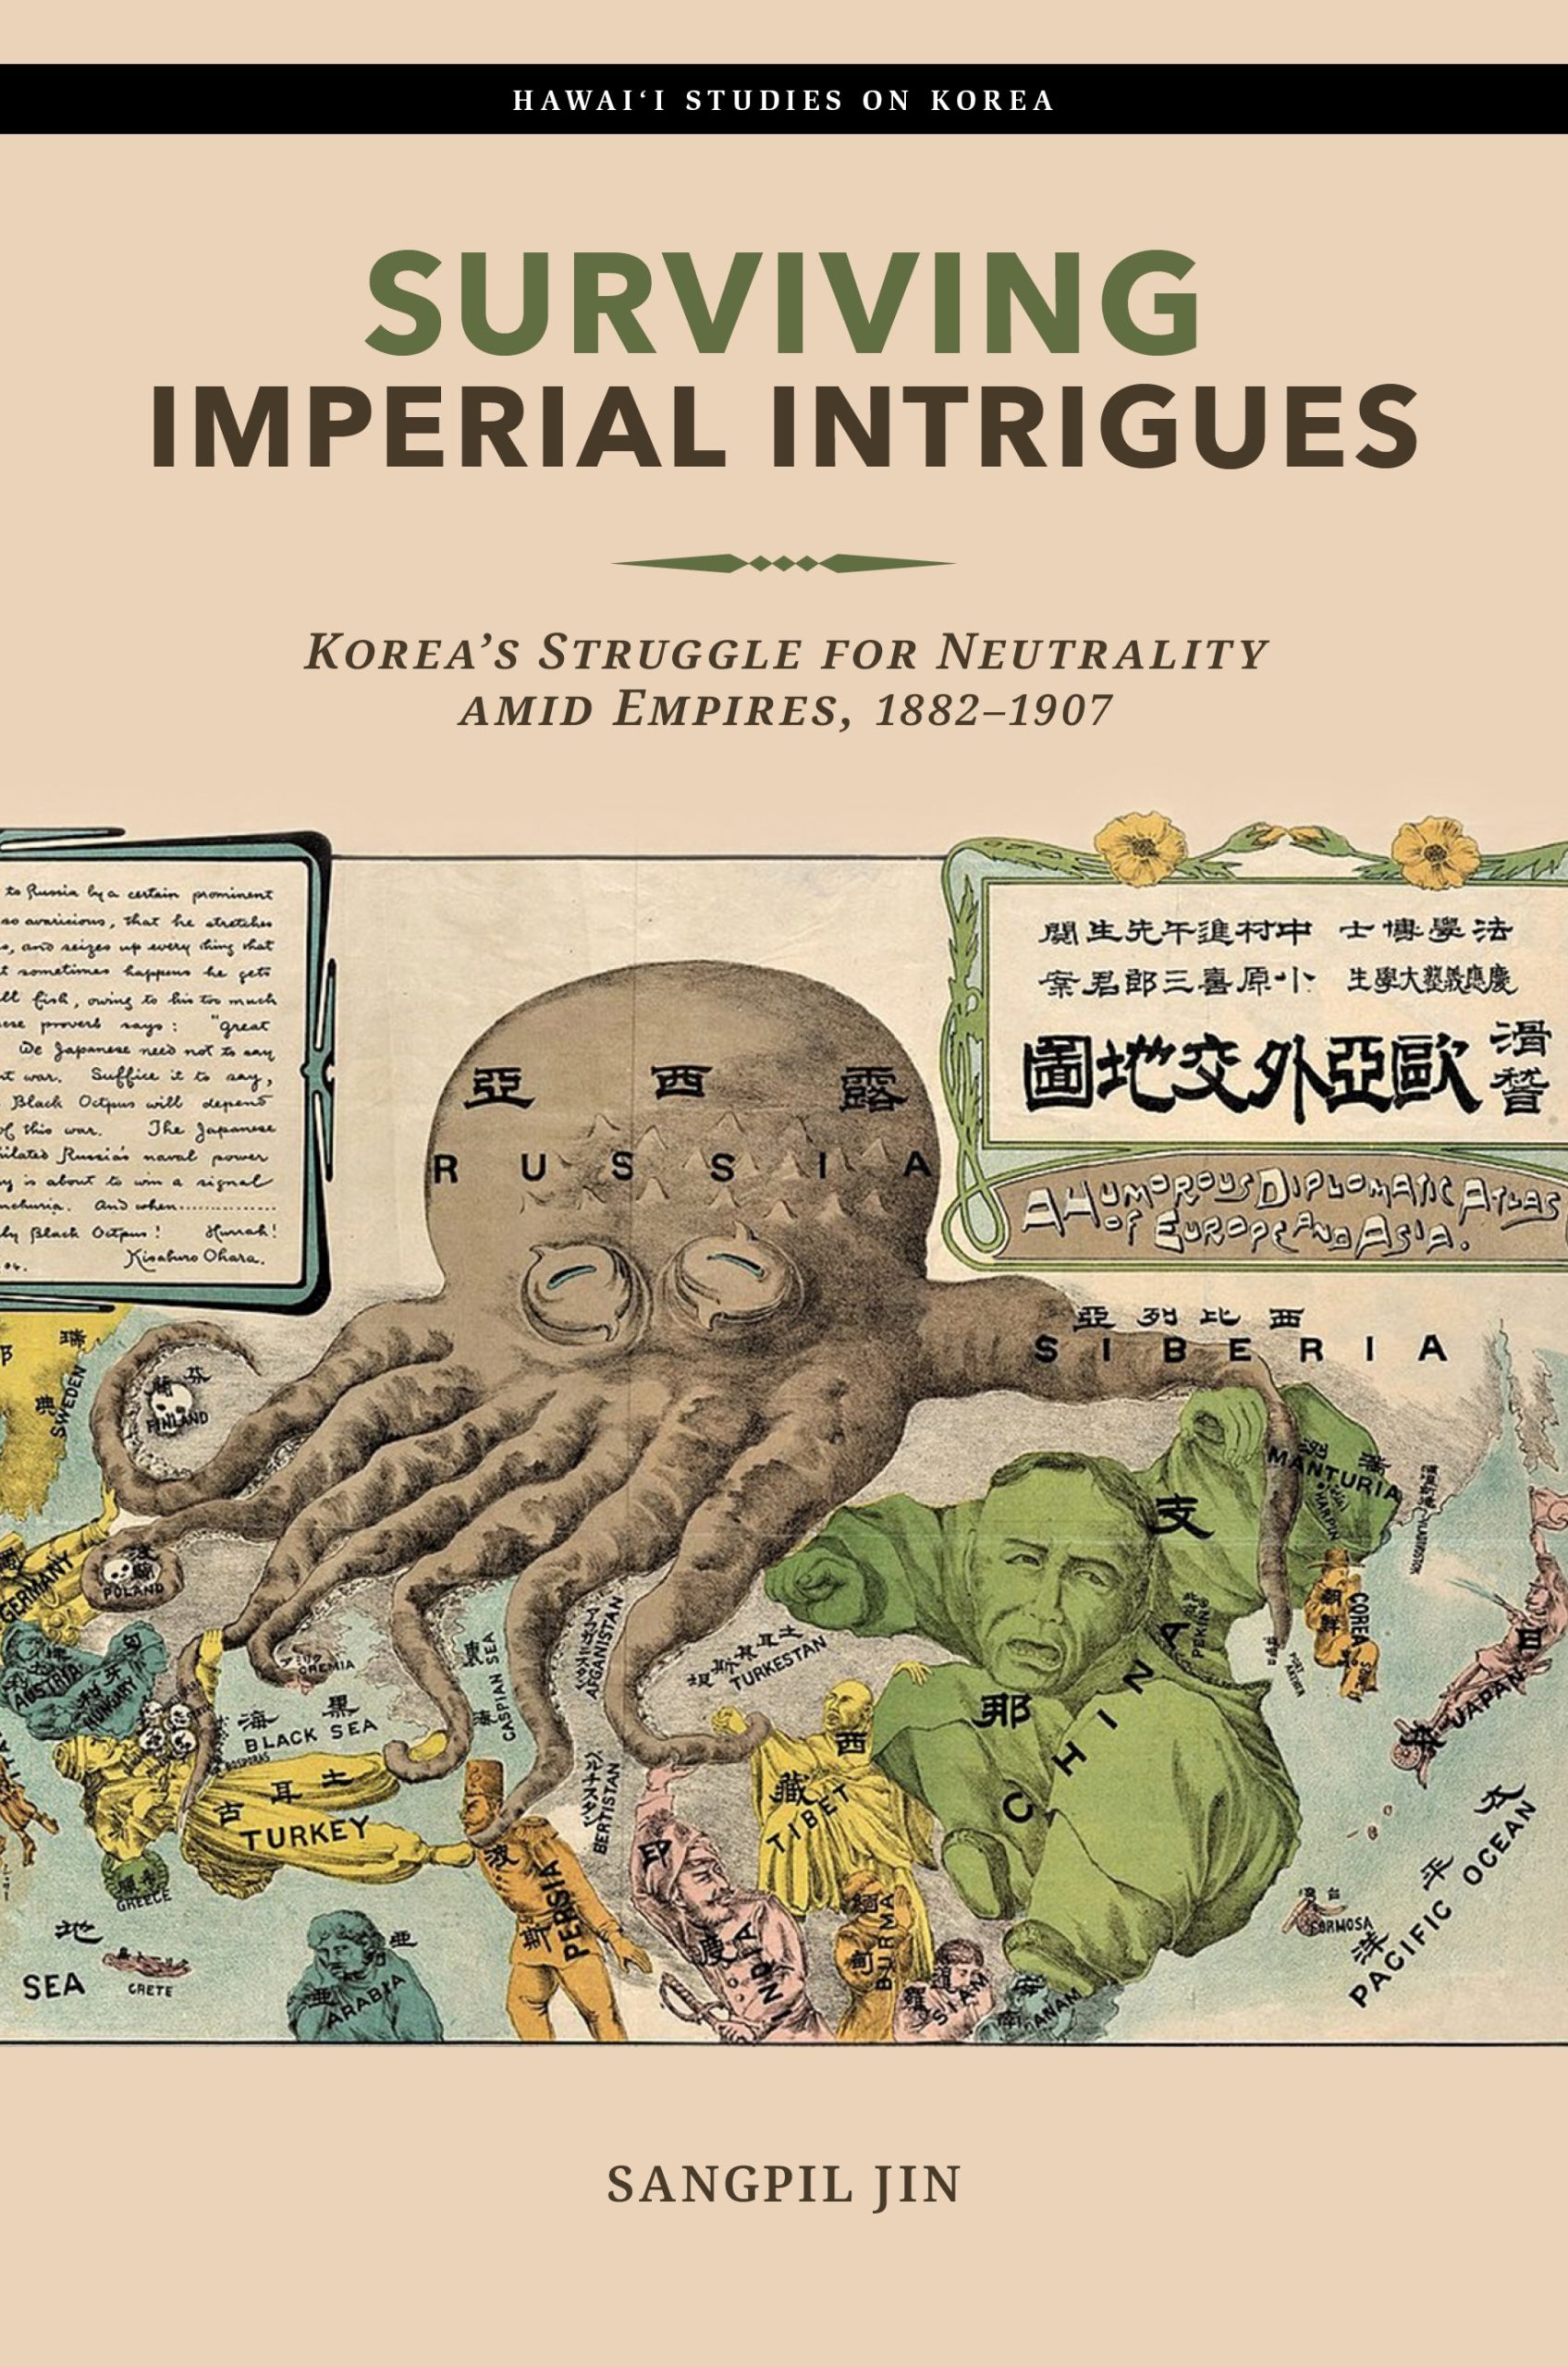 The book cover of “Surviving Imperial Intrigues: Korea's Struggle for Neutrality amid Empires, 1882-1907" by Sangpil Jin, which includes the title of the book, the author’s name, the words ‘Hawai’i Studies on Korea’, and a cartoon illustration entitled ‘A Humorous Diplomatic Atlas of Europe and Asia’.